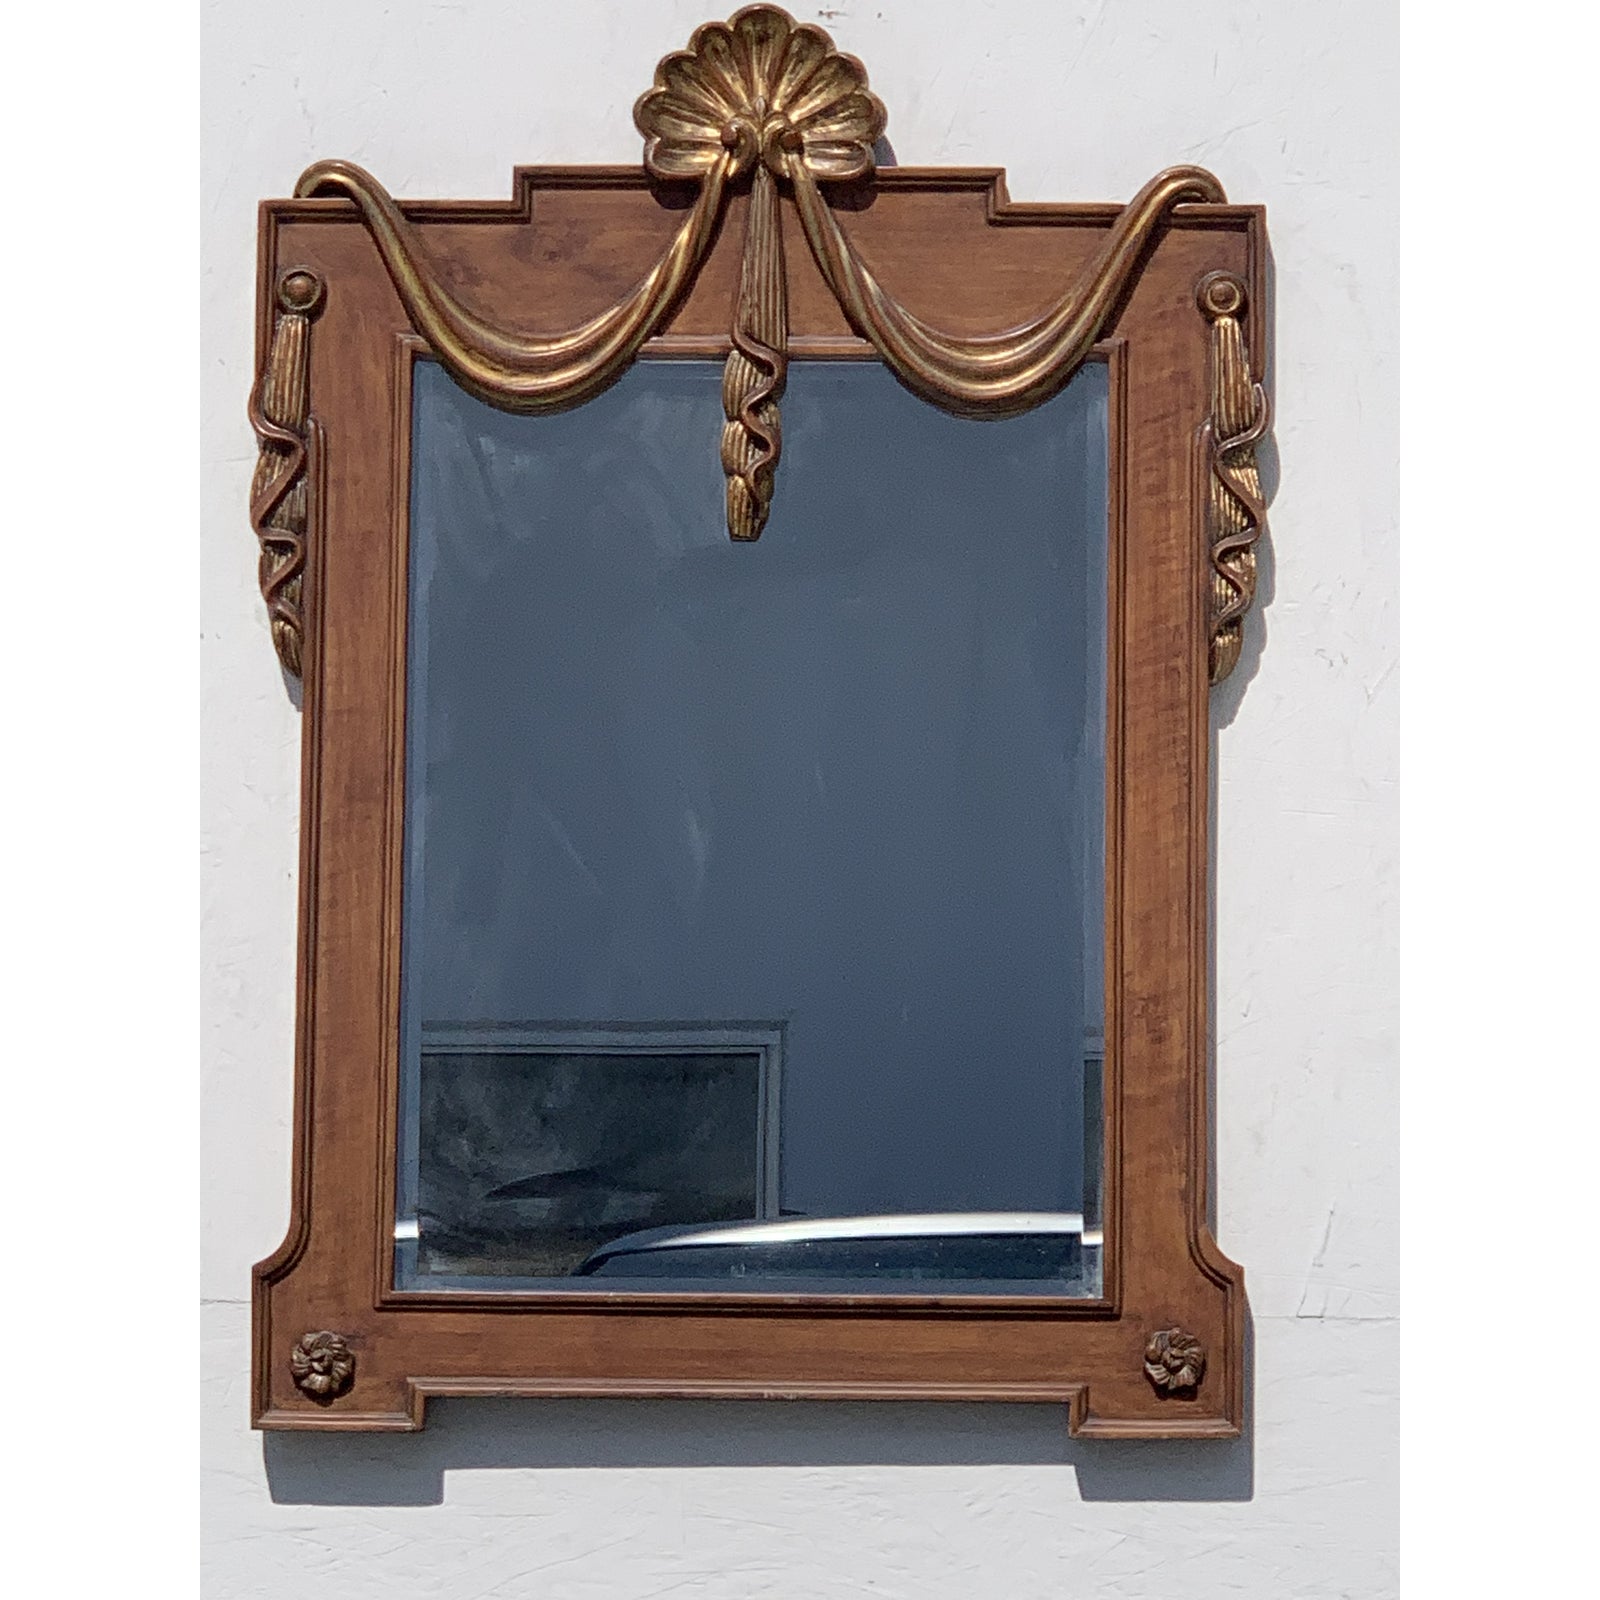 Late 19th Century French Empire Style Mirror